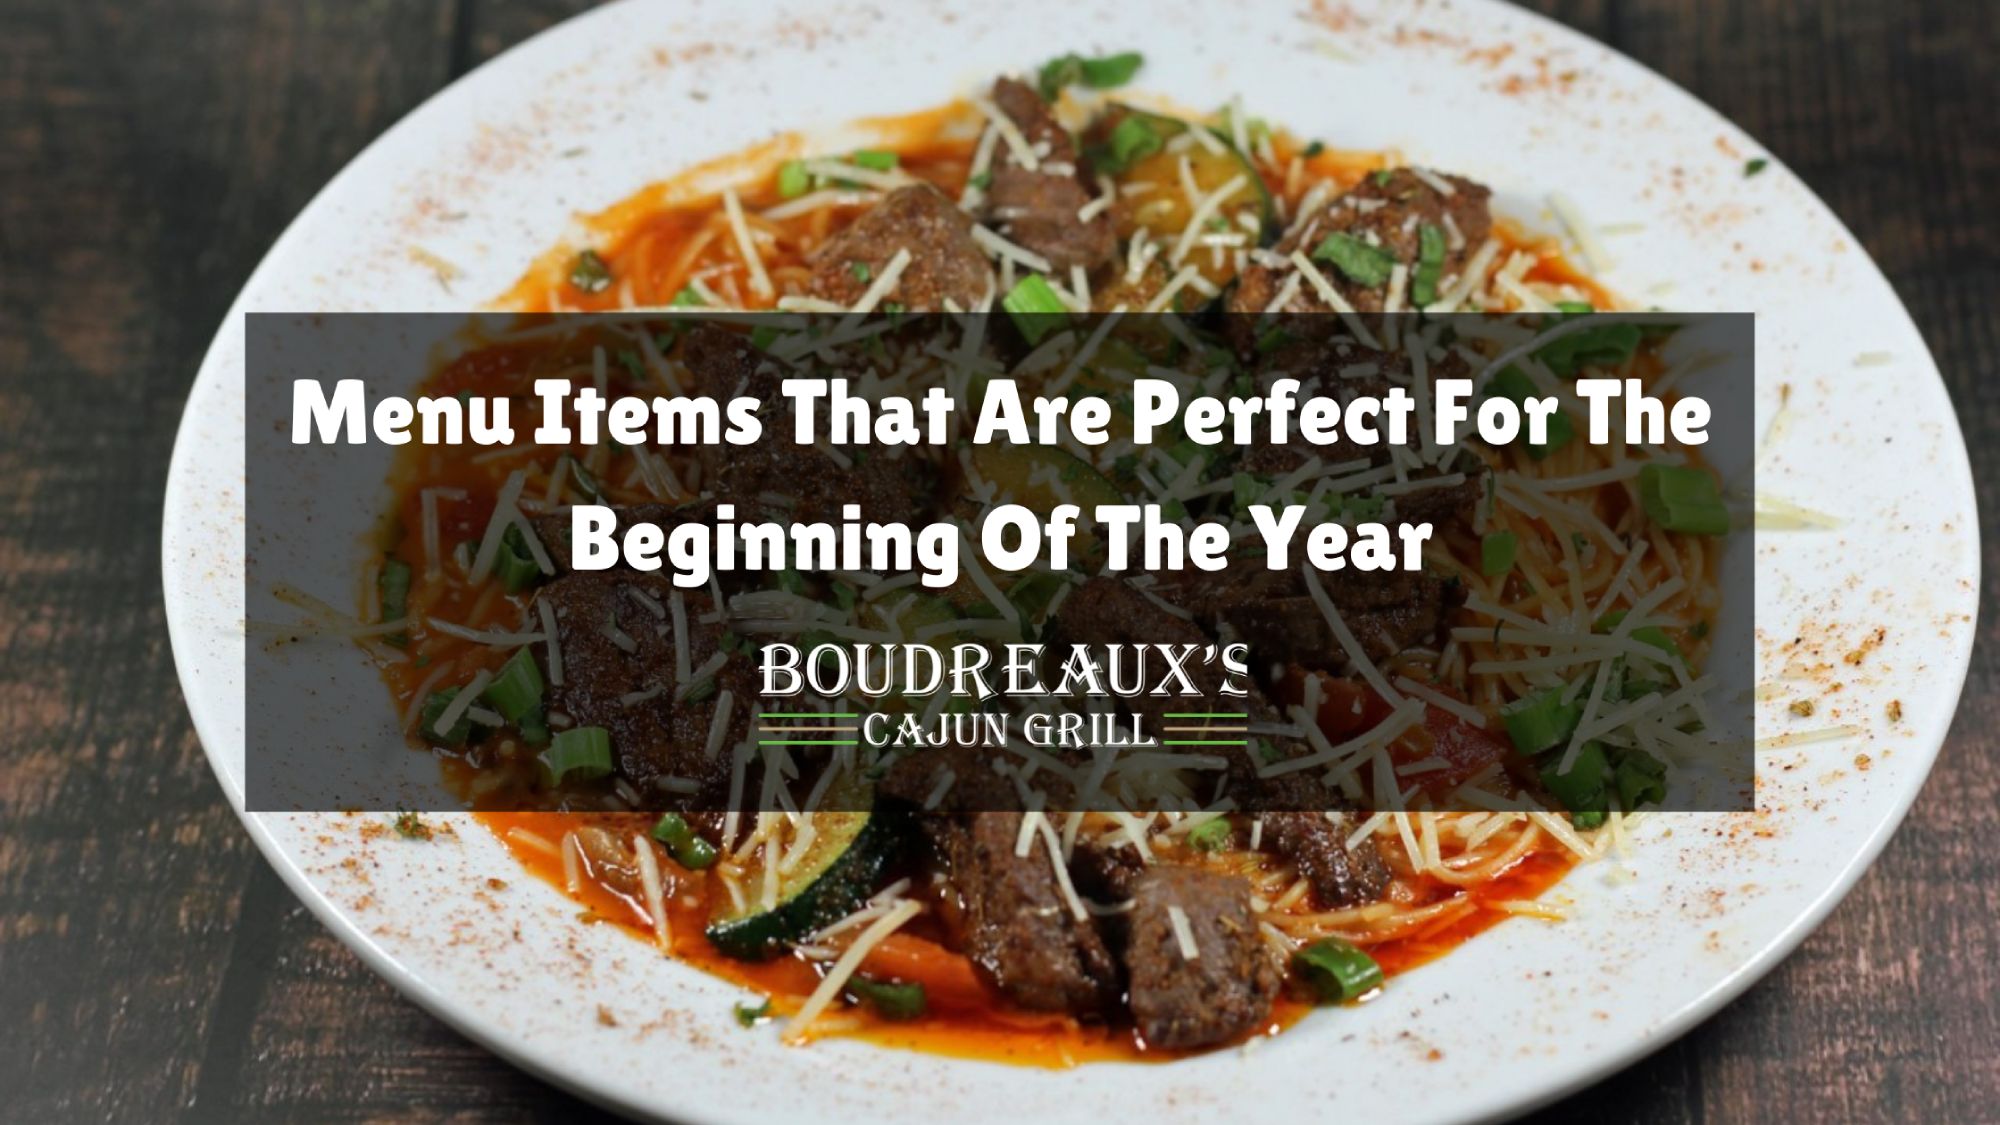 Menu Items That Are Perfect For The Beginning Of The Year